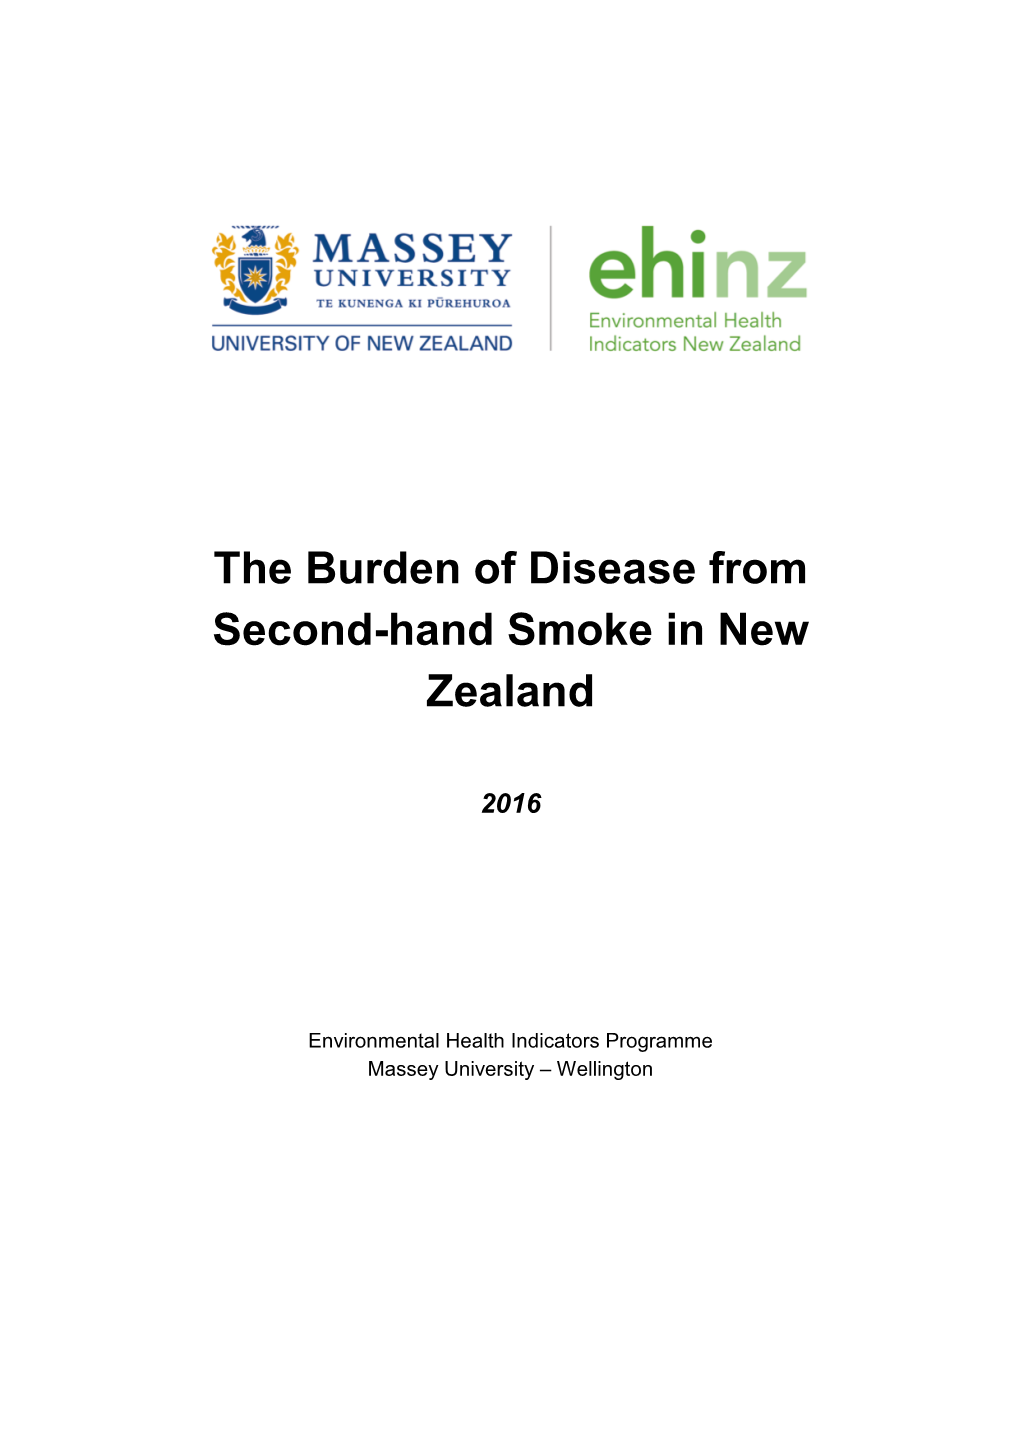 The Burden of Disease from Second-Hand Smoke in New Zealand